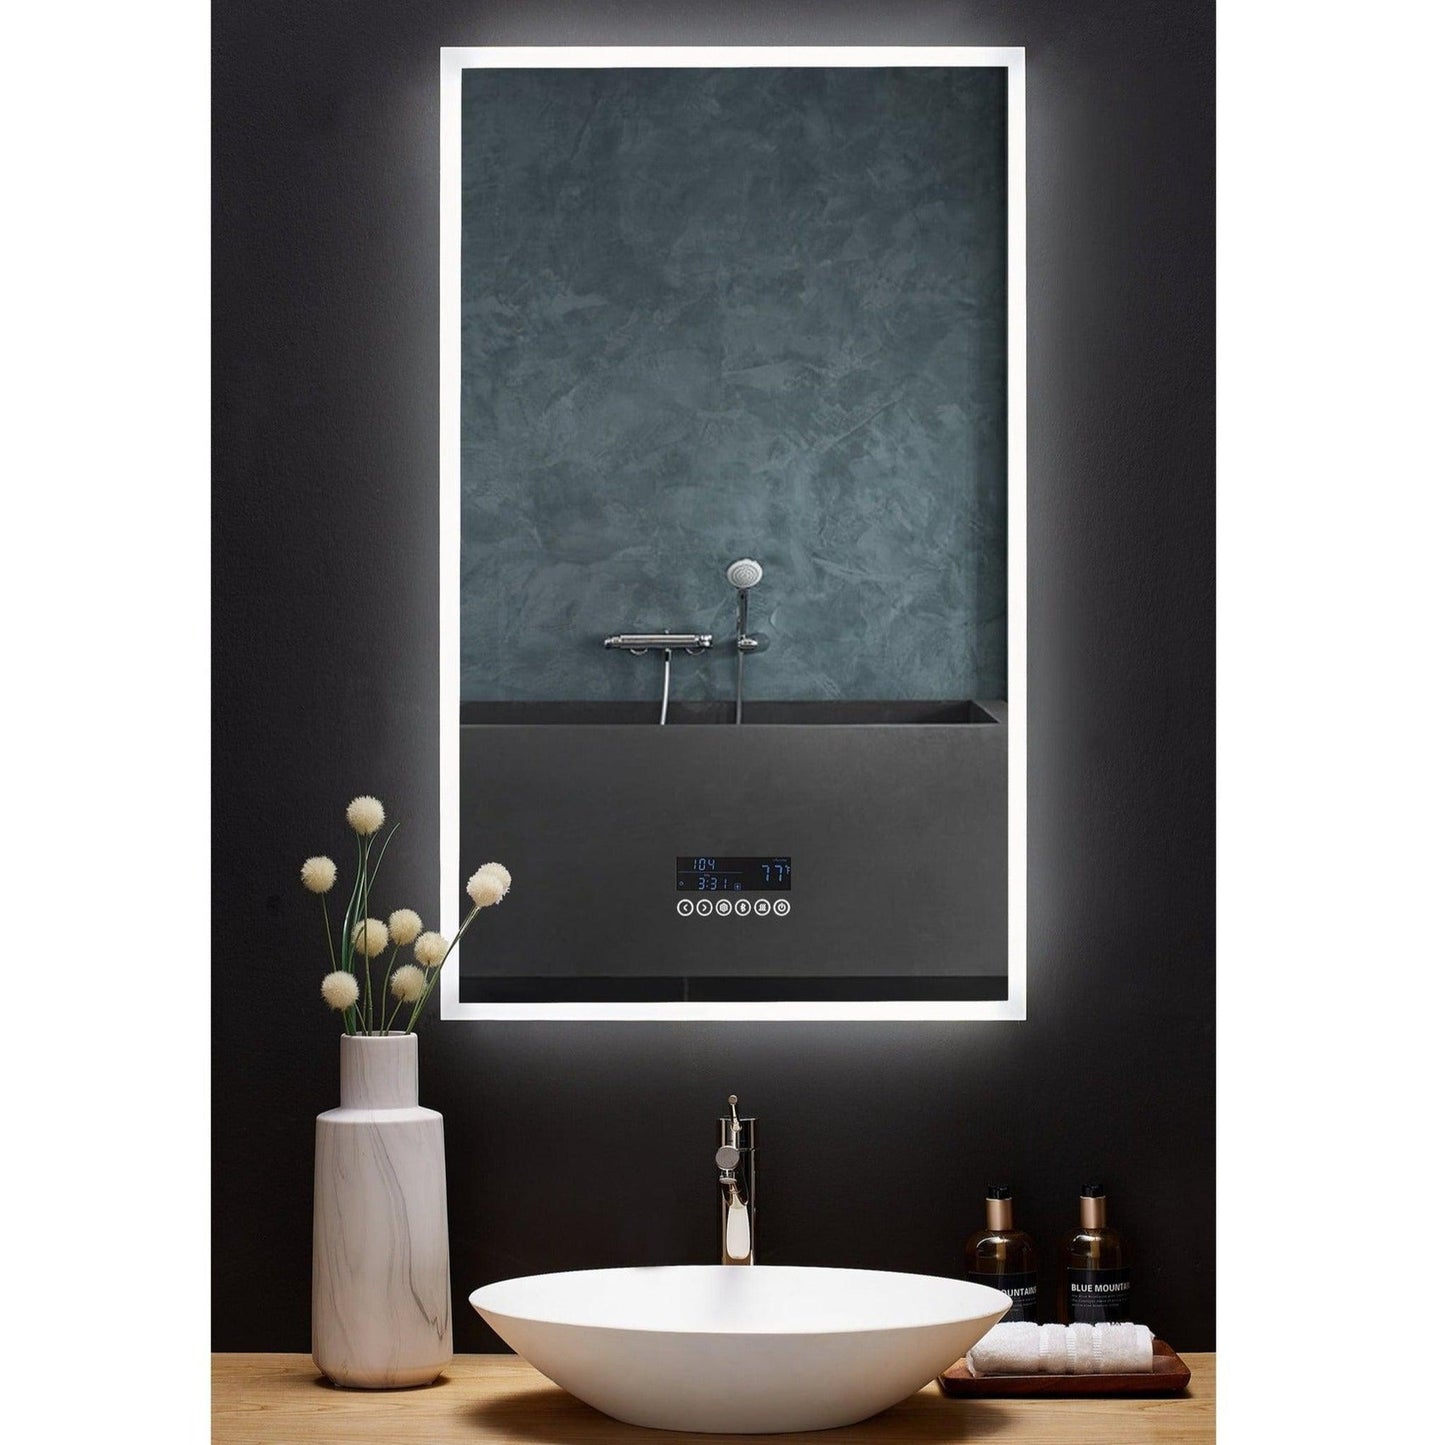 https://usbathstore.com/cdn/shop/products/Ancerre-Designs-Immersion-24-x-40-Modern-Rectangle-LED-Lighted-Frameless-Bathroom-Vanity-Mirror-With-Bluetooth-Defogger-Digital-Display-and-Mounting-Hardware.jpg?v=1673747071&width=1445